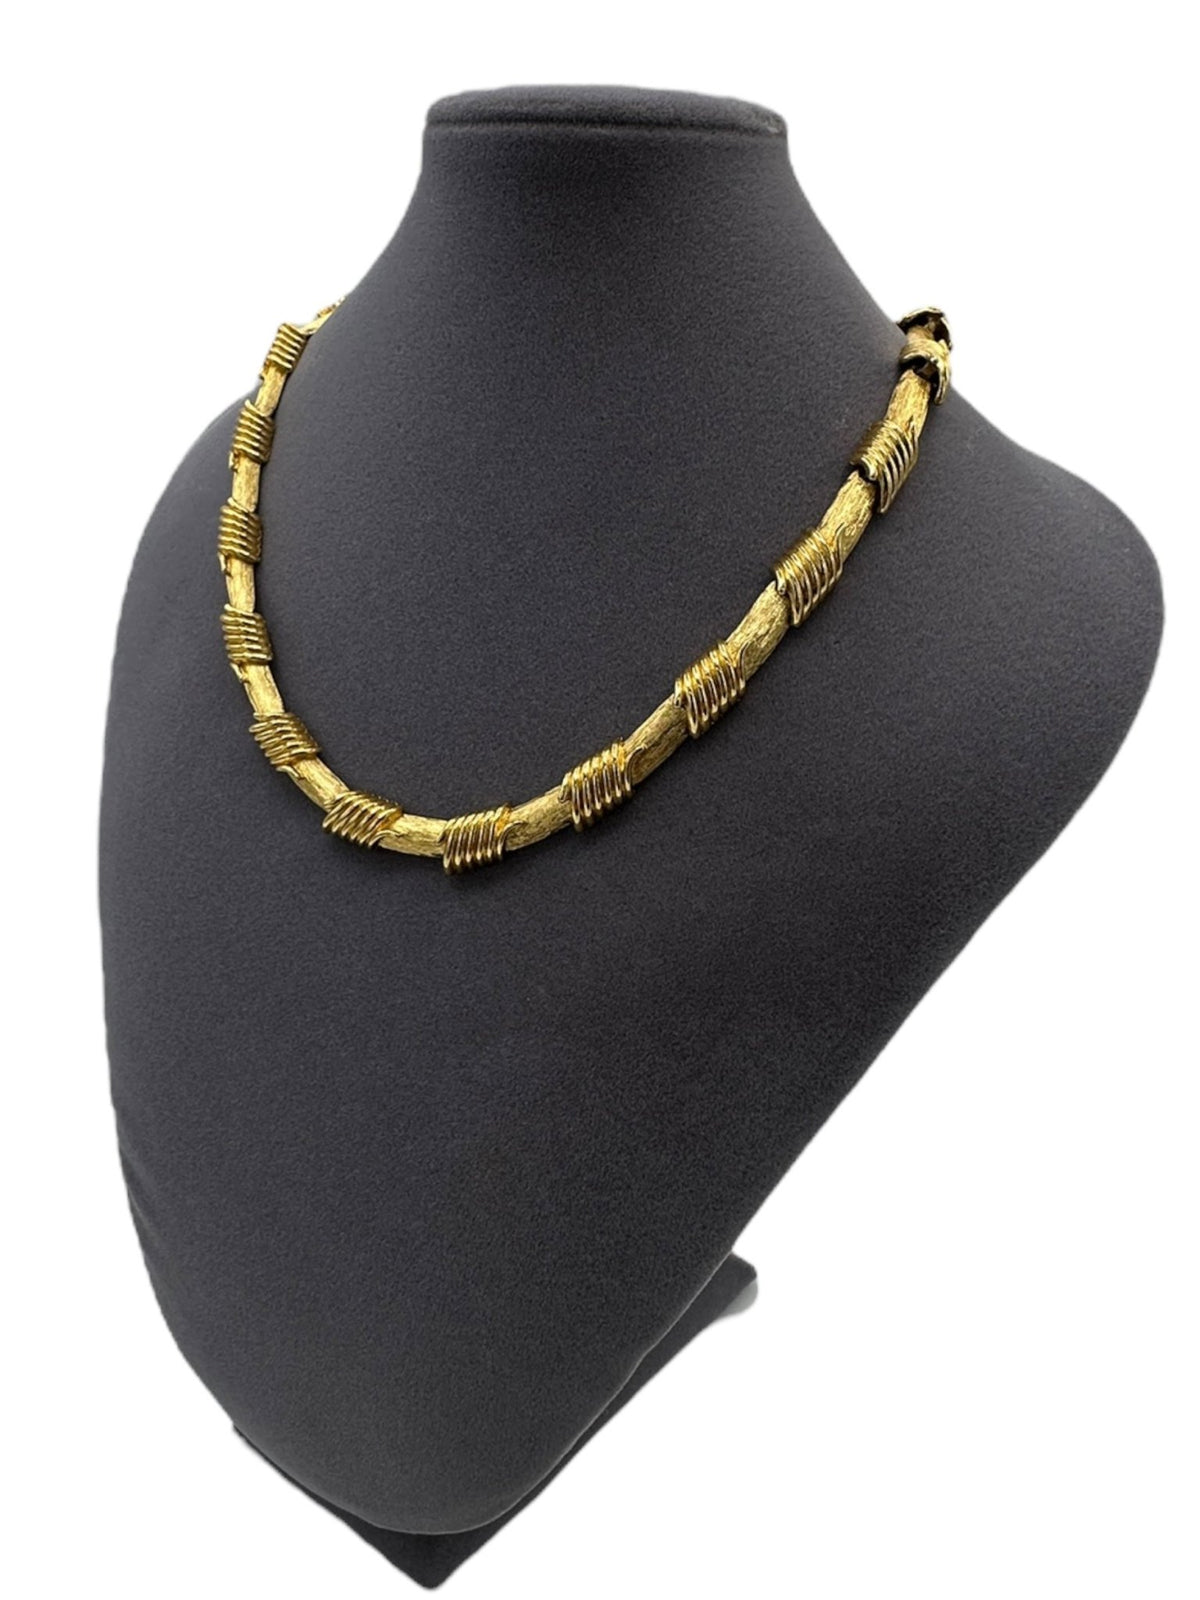 Monet Vintage Jewelry Gold Brush Textured Link Necklace - 24 Wishes Vintage Jewelry